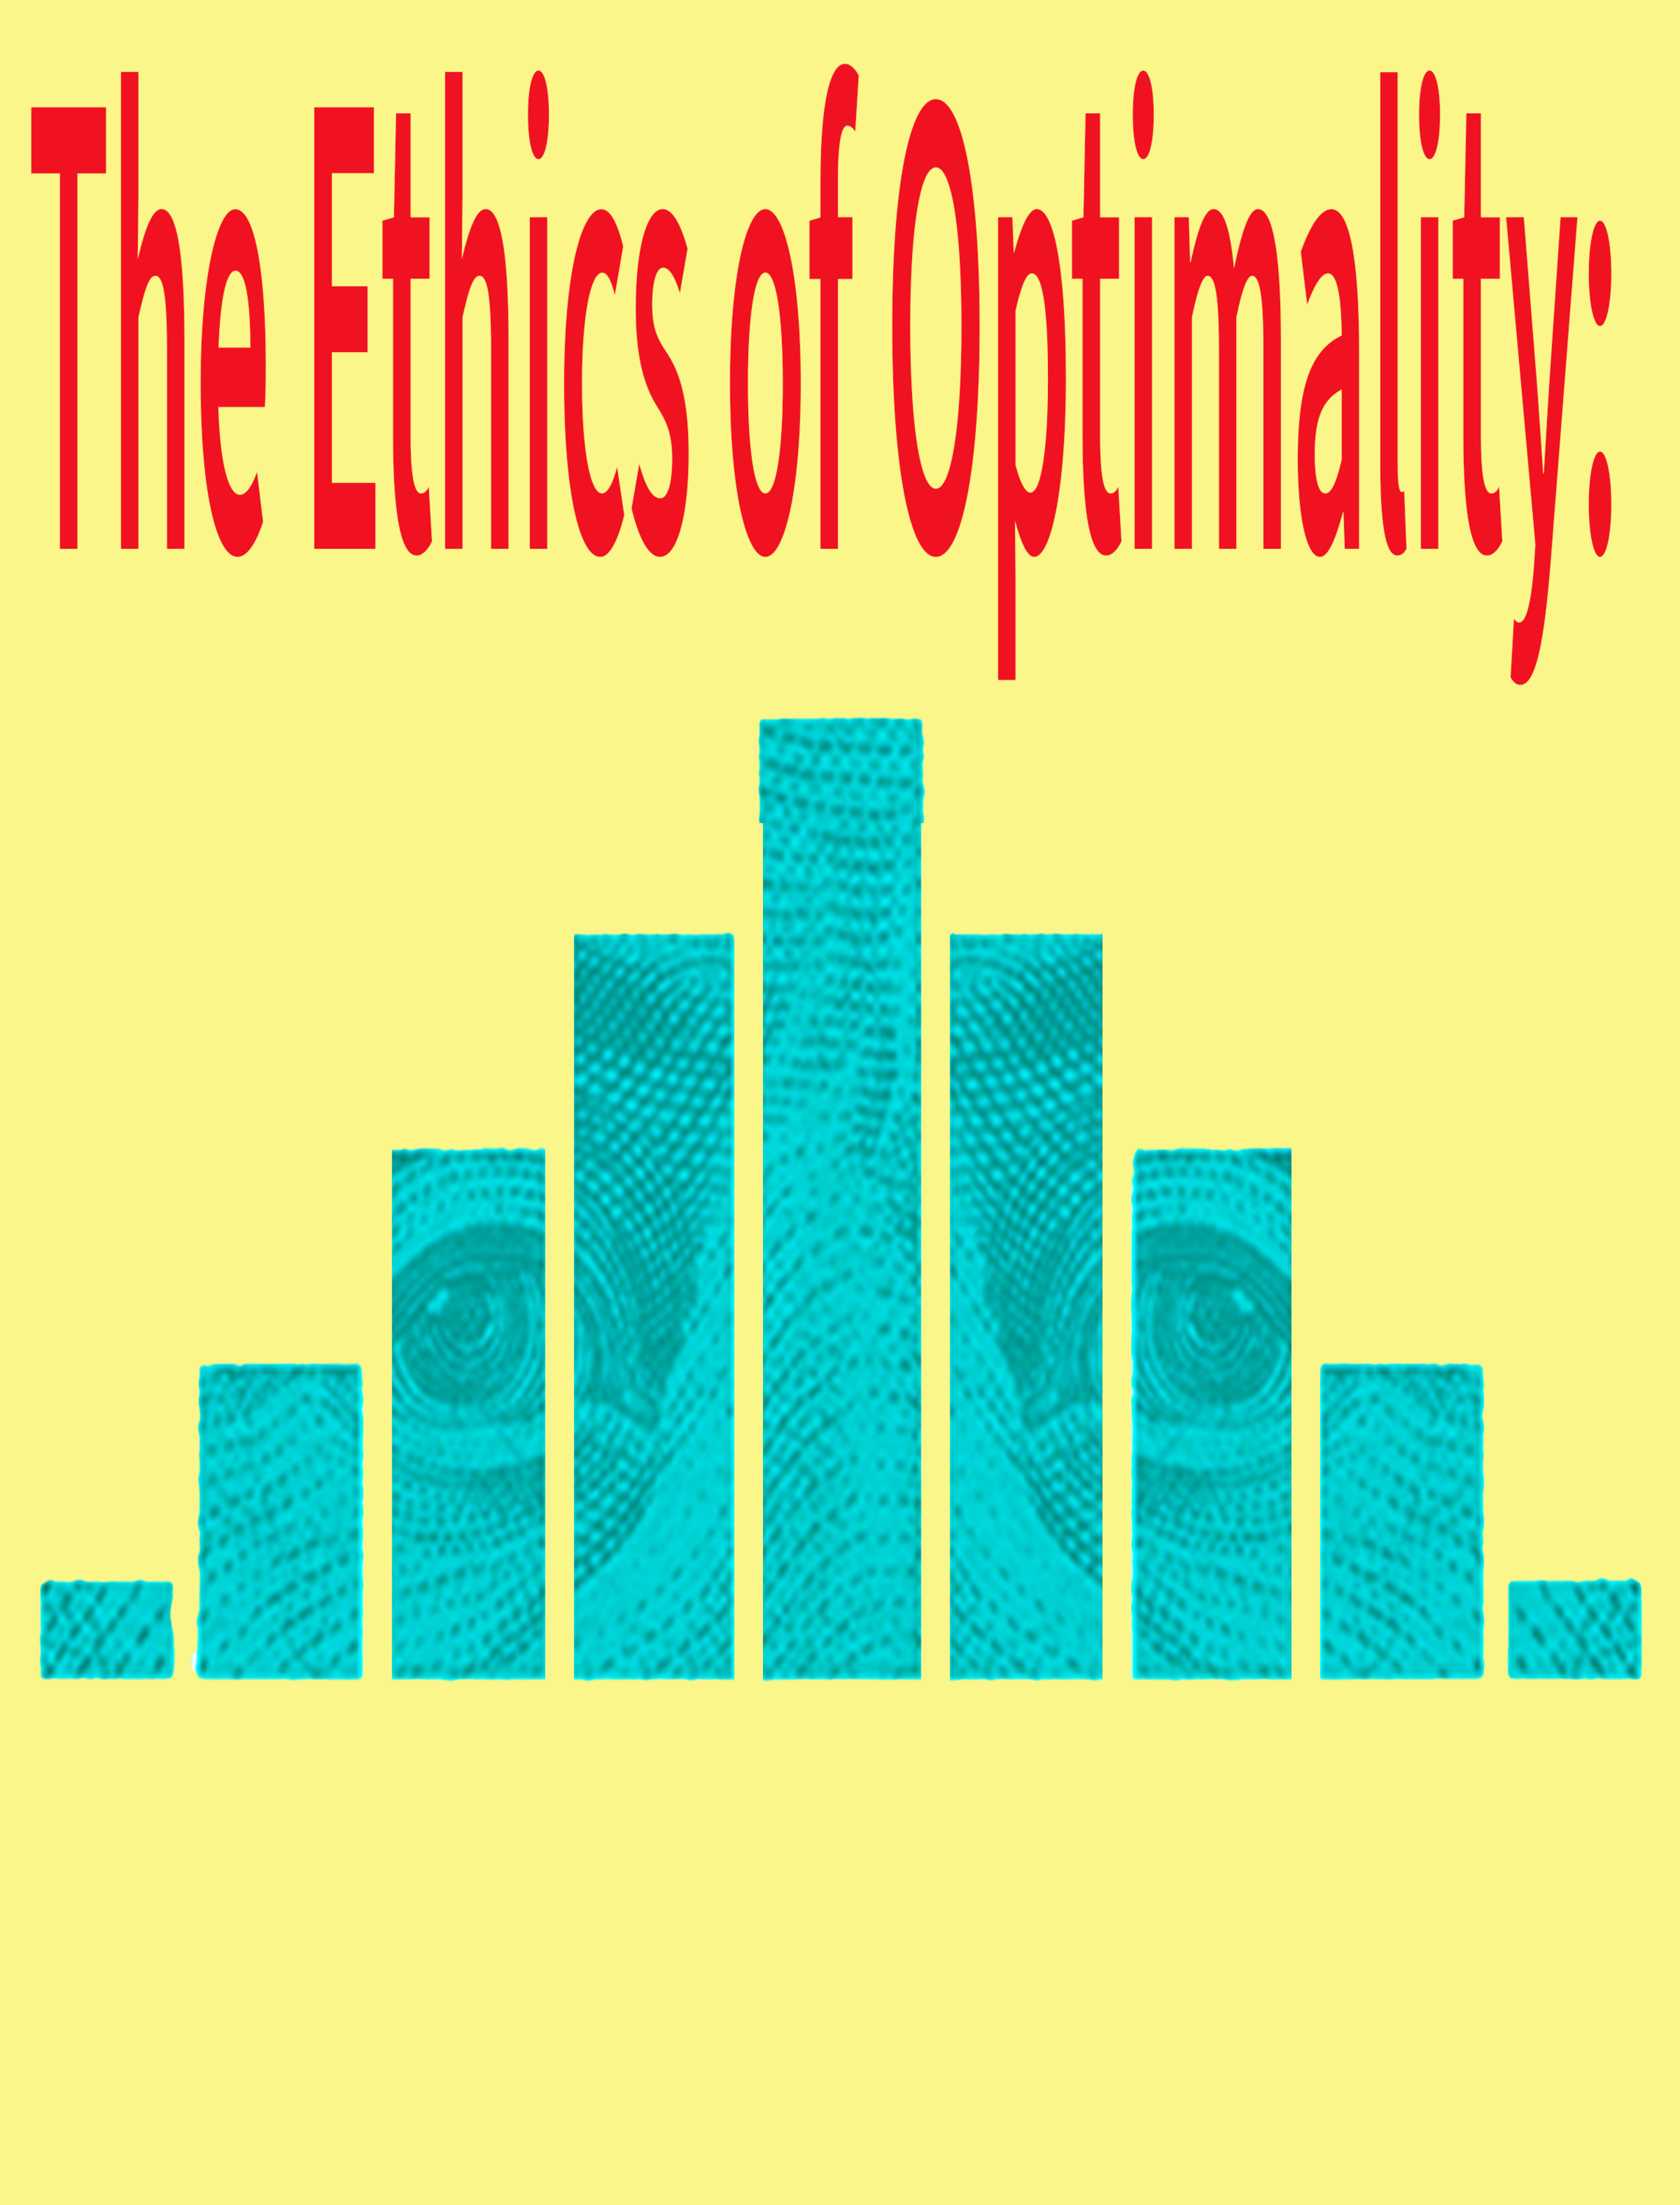 text that reads "The Ethics of Optimality", with a bar graph , graph has two eyes in it looking out at you